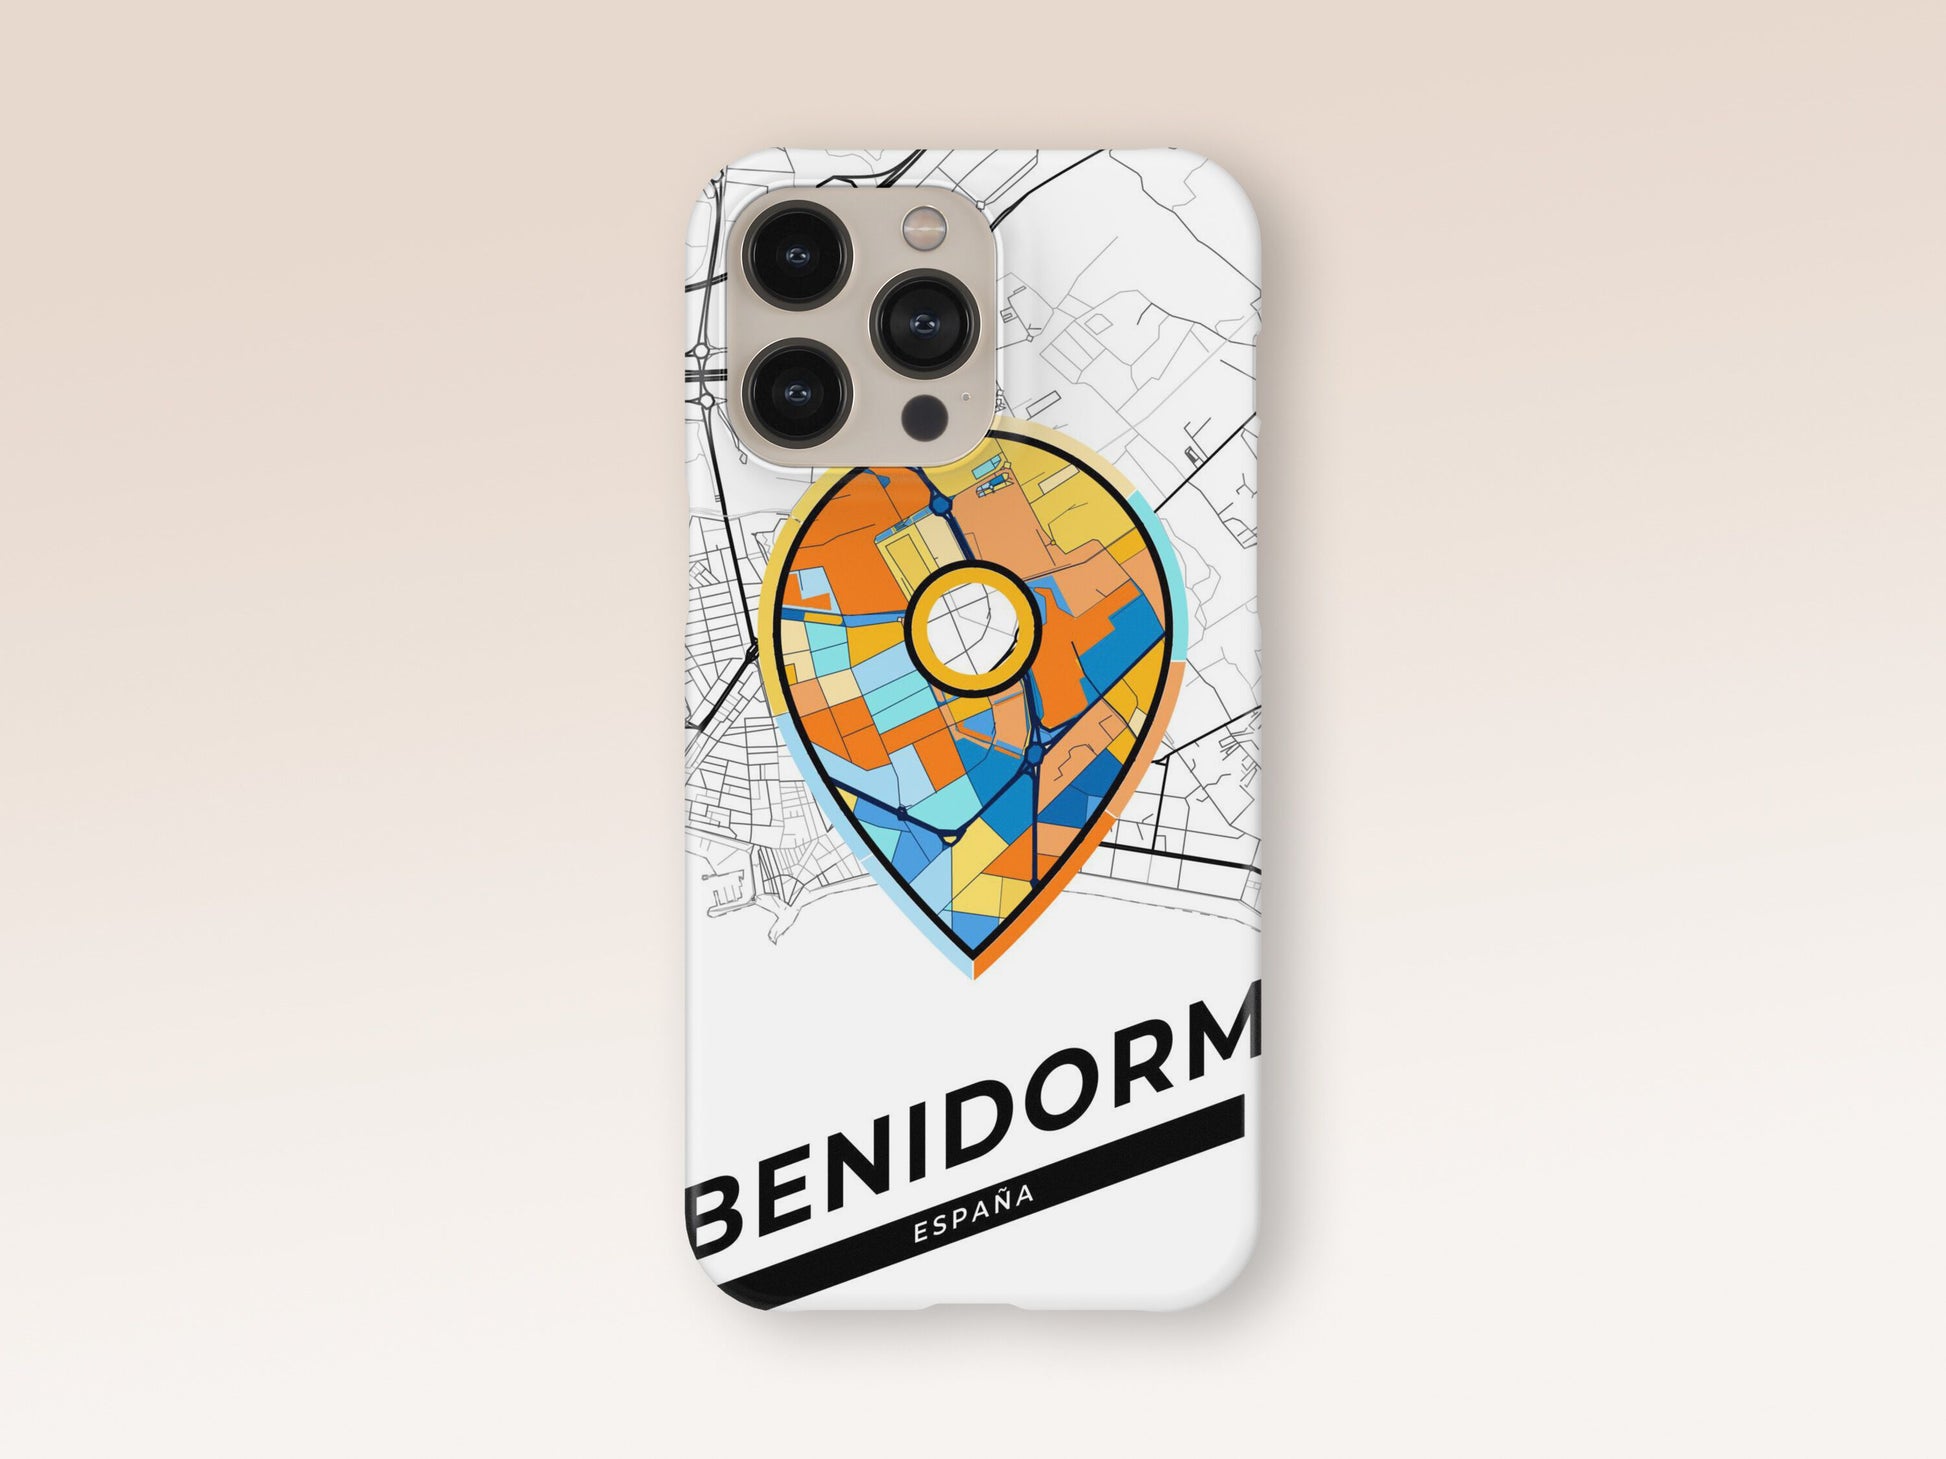 Benidorm Spain slim phone case with colorful icon. Birthday, wedding or housewarming gift. Couple match cases. 1